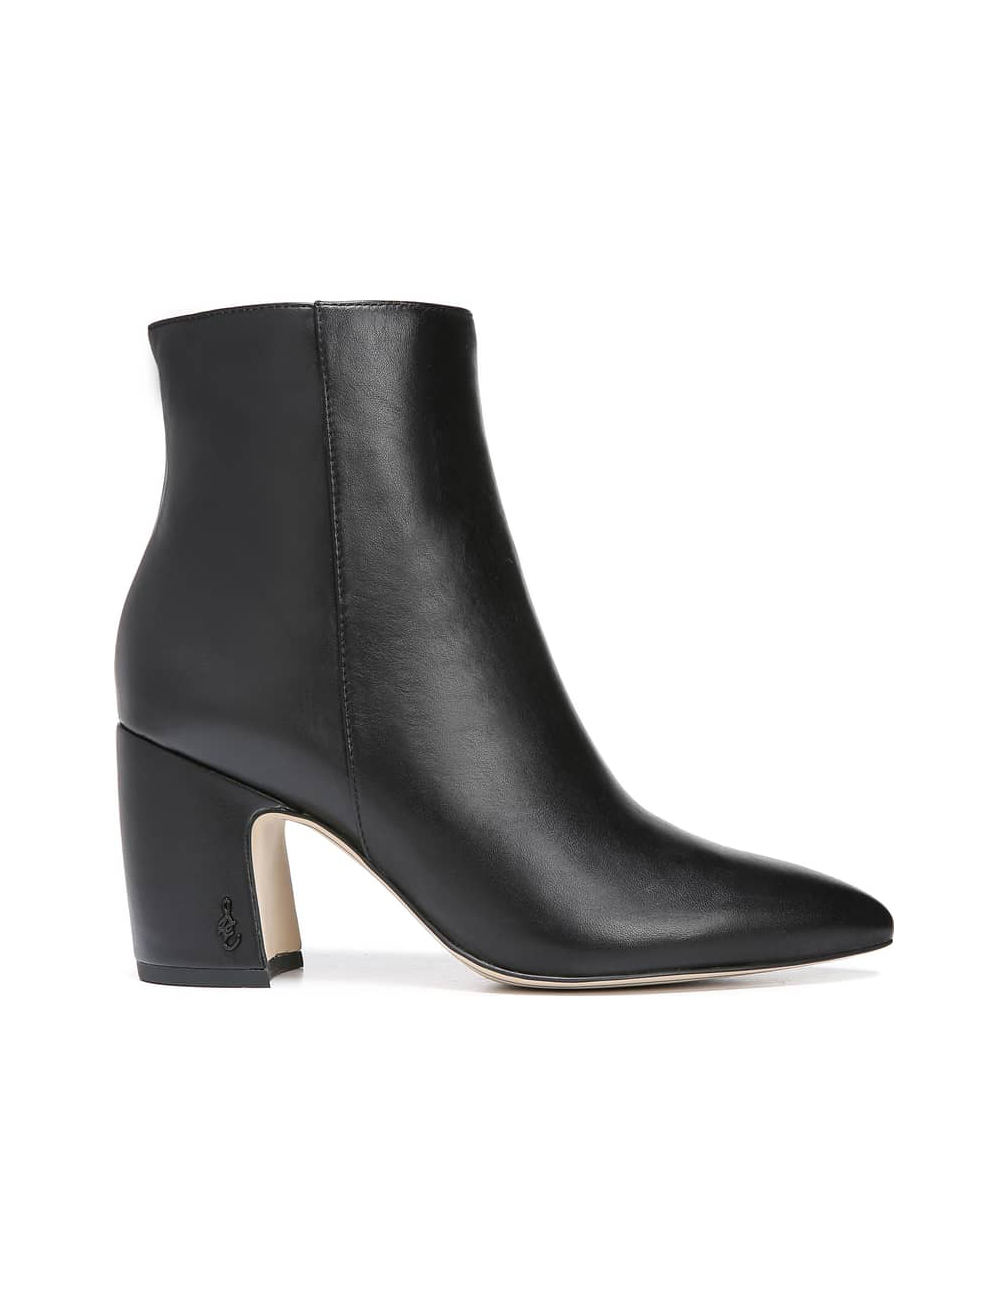 comfortable chelsea boots for walking